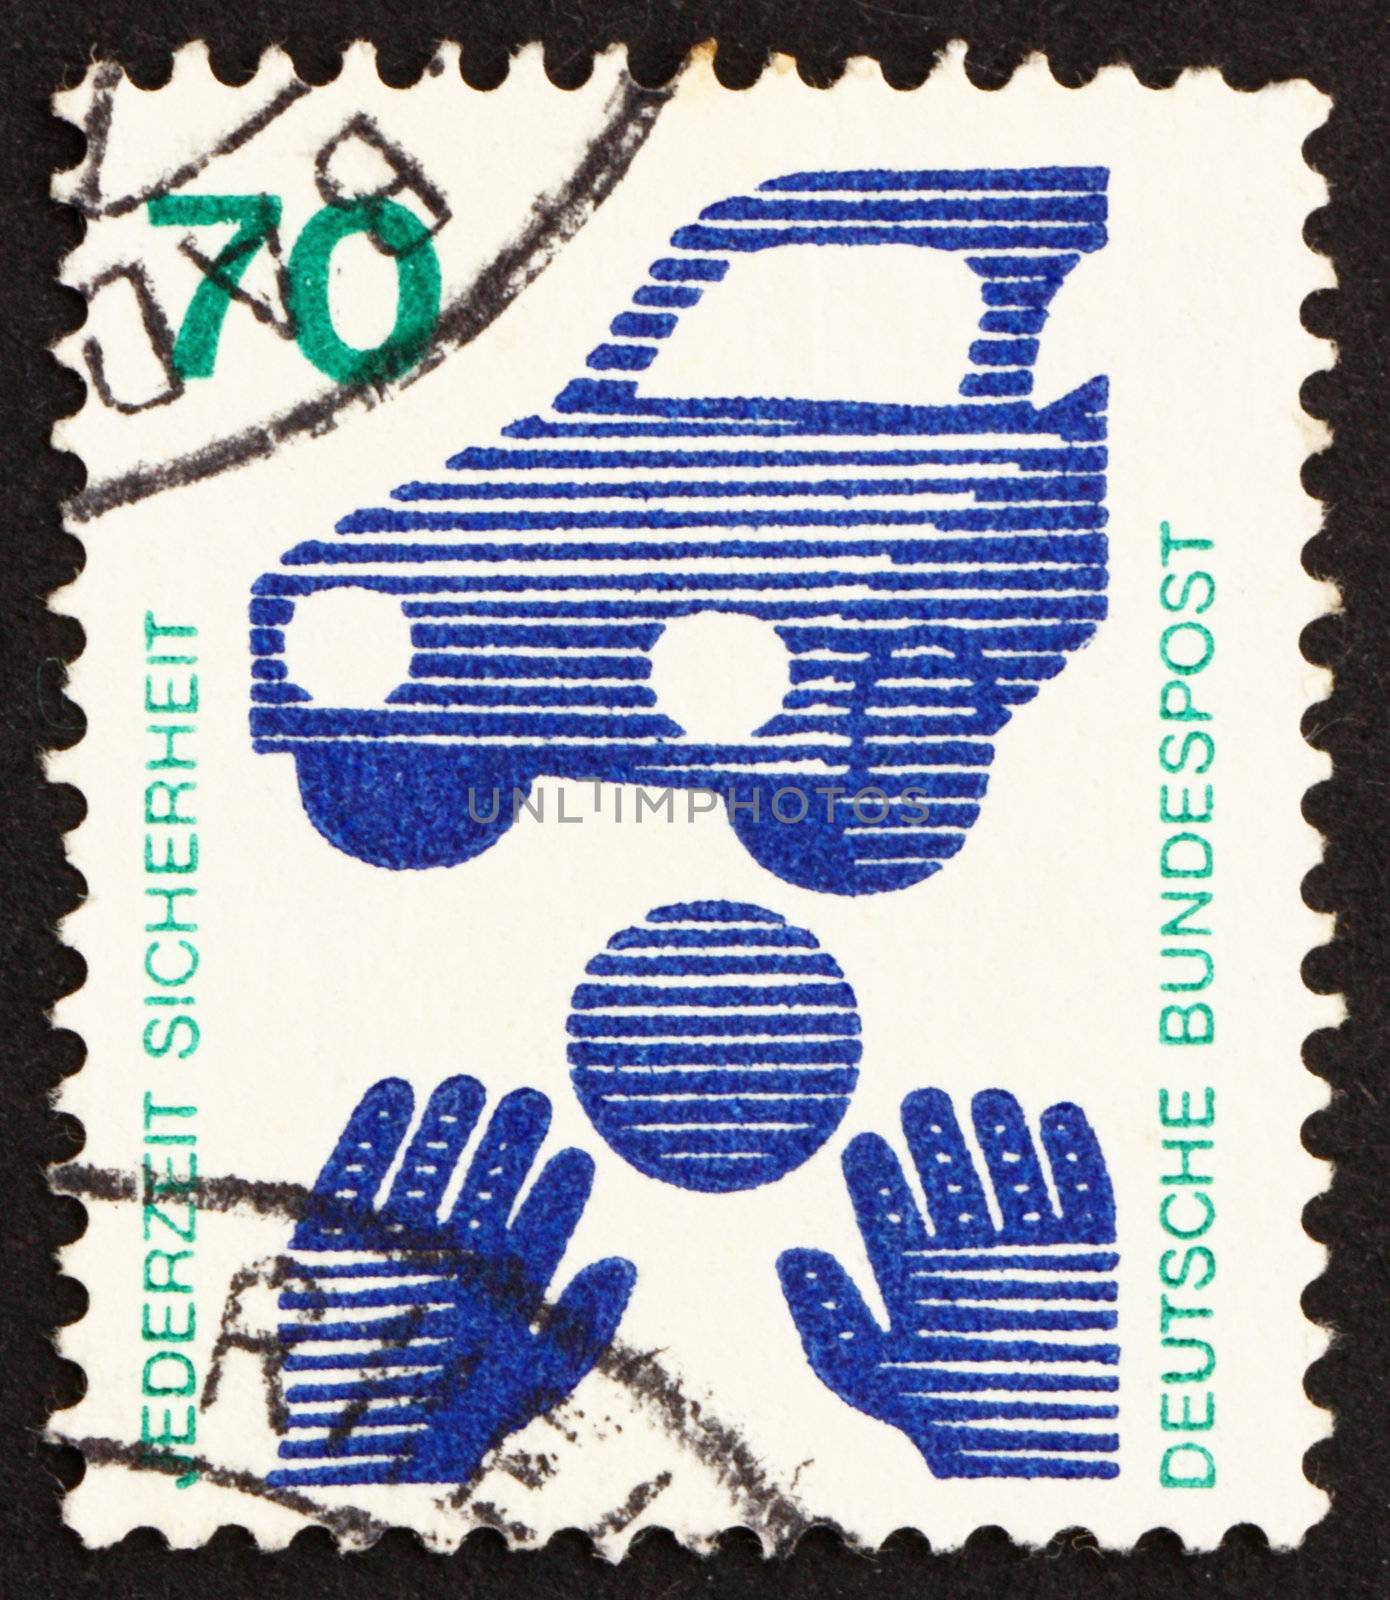 GERMANY - CIRCA 1973: a stamp printed in the Germany shows Traffic Safety, Ball Rolling before Car, circa 1973